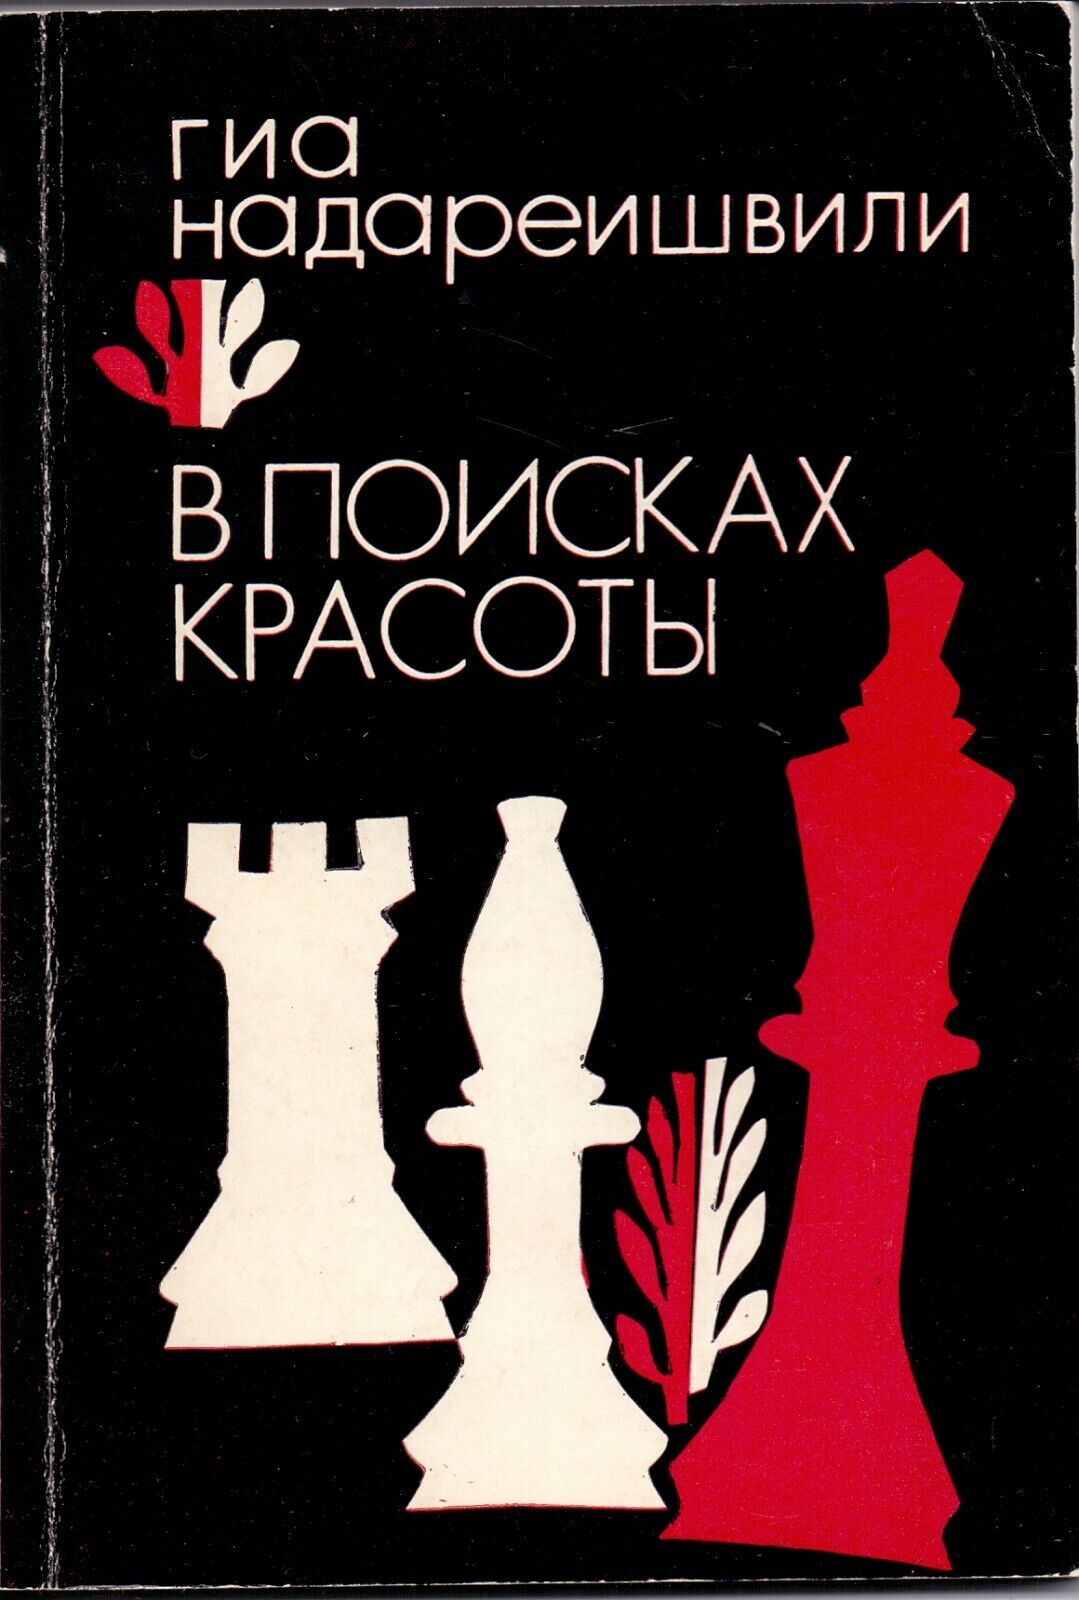 11115.Chess book: Signed by Nadareishvili to Kasparov. In search of beauty 1986